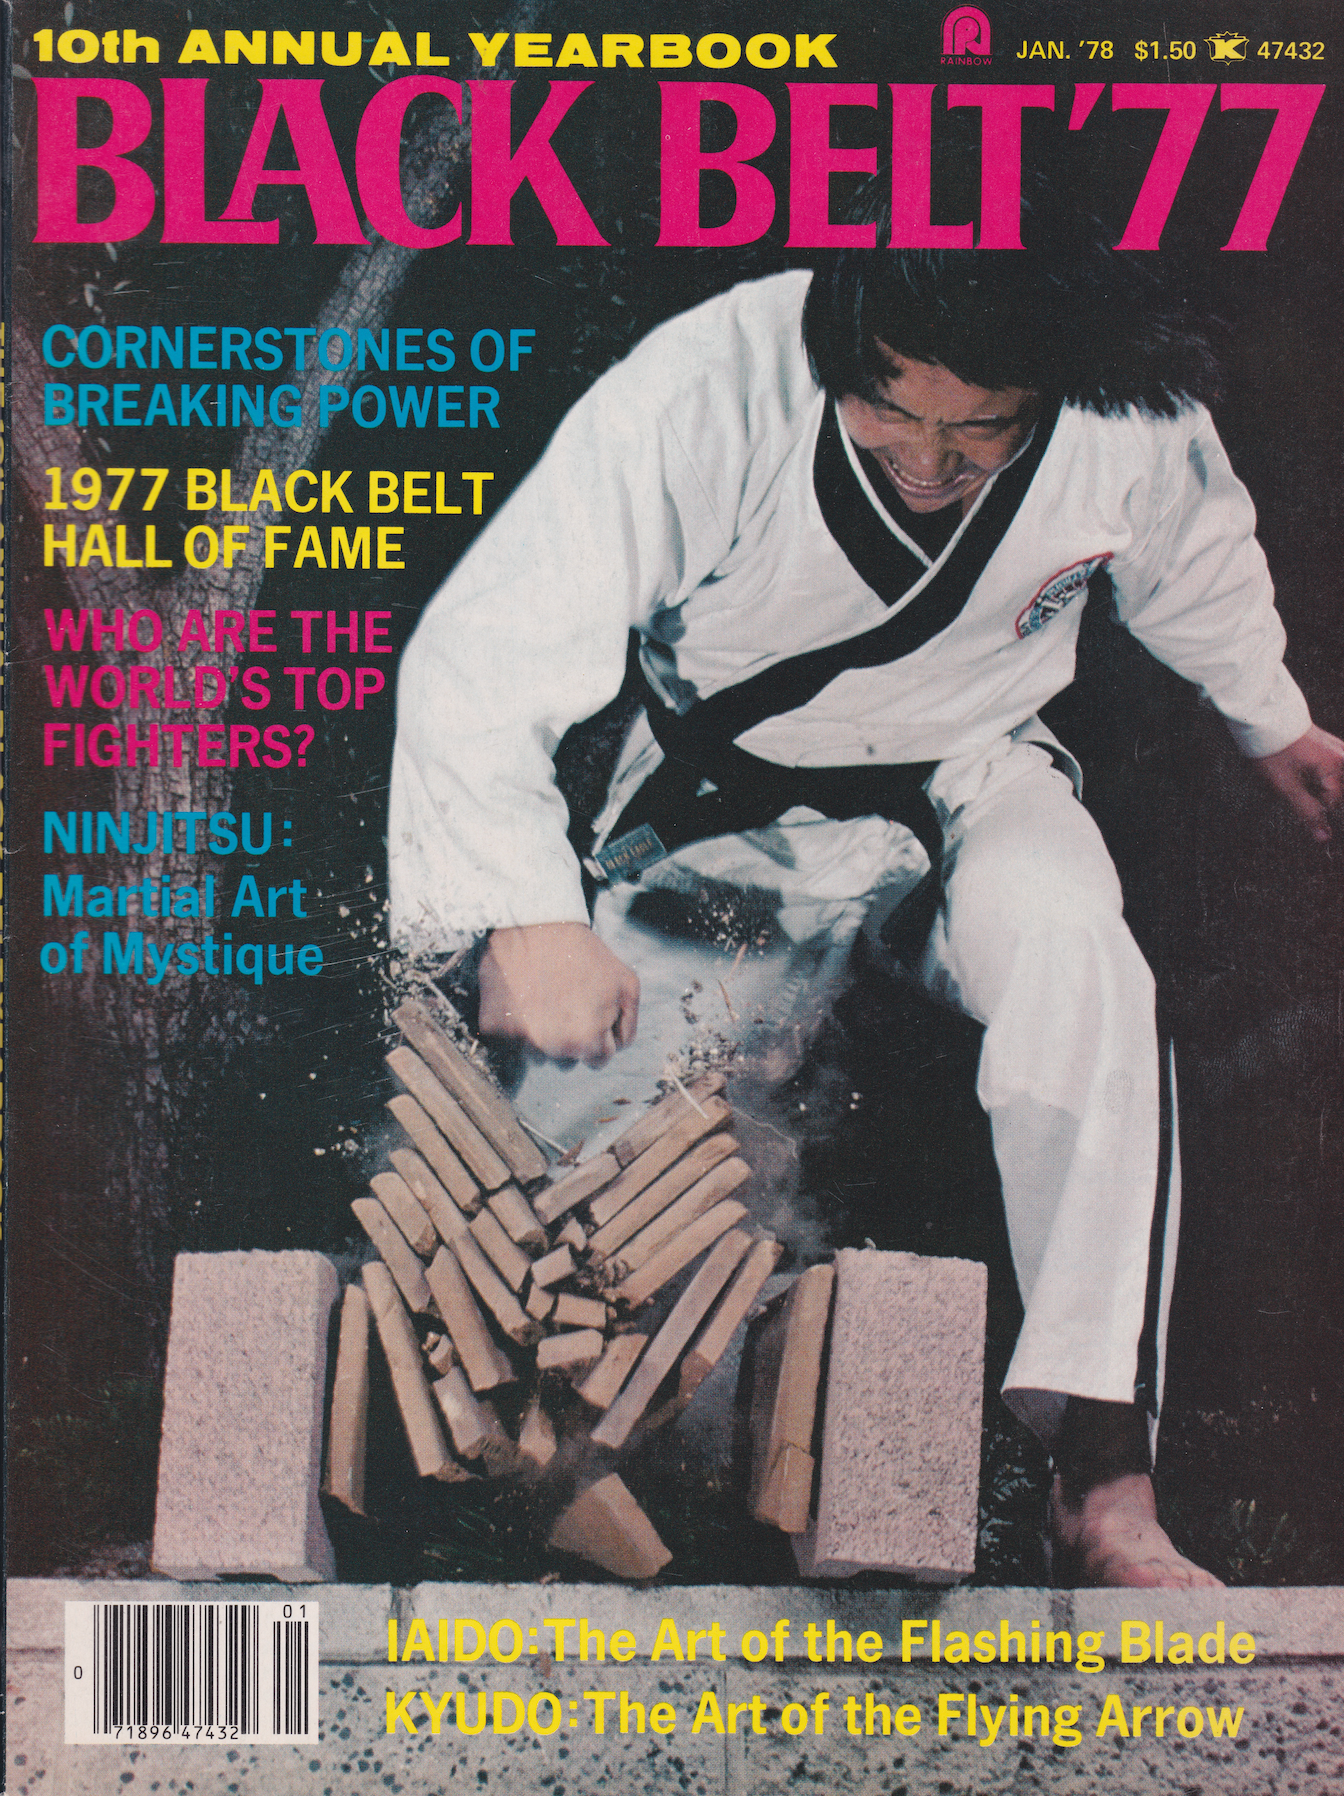 Black Belt Magazine Yearbook 1977 (Preowned) - Budovideos Inc